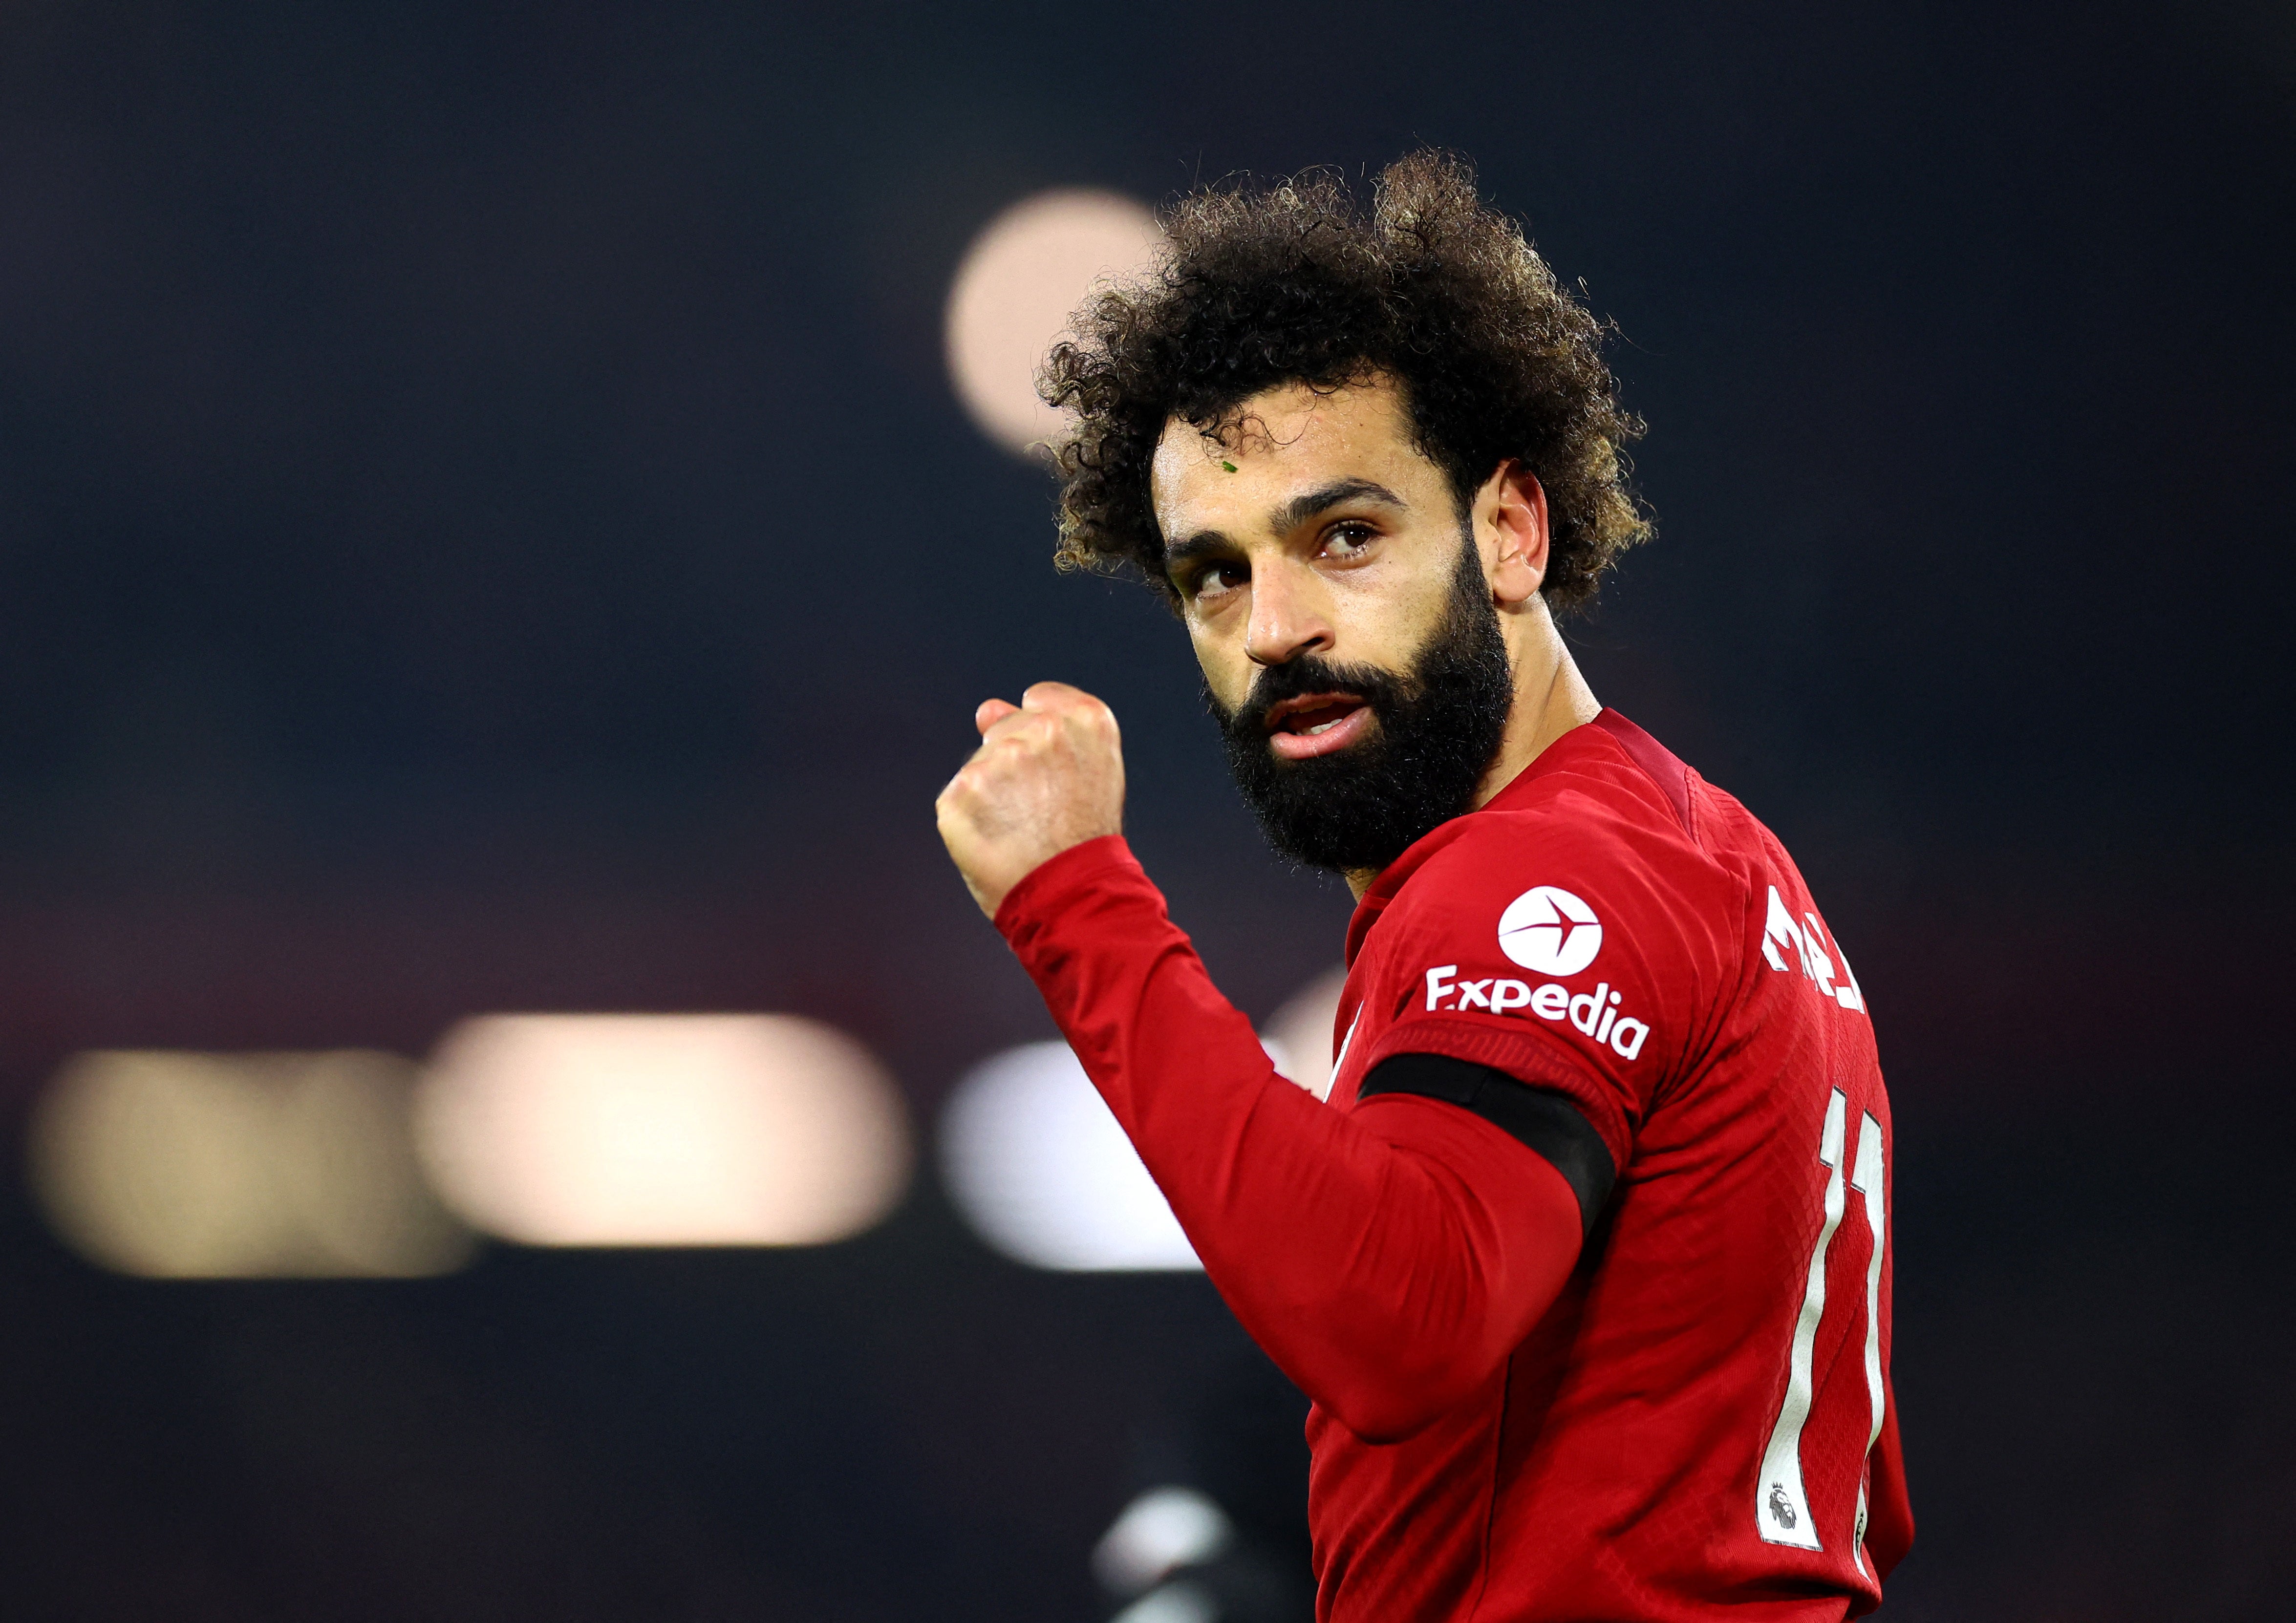 Salah finished a counter-attack just 15 seconds after Everton hit the post